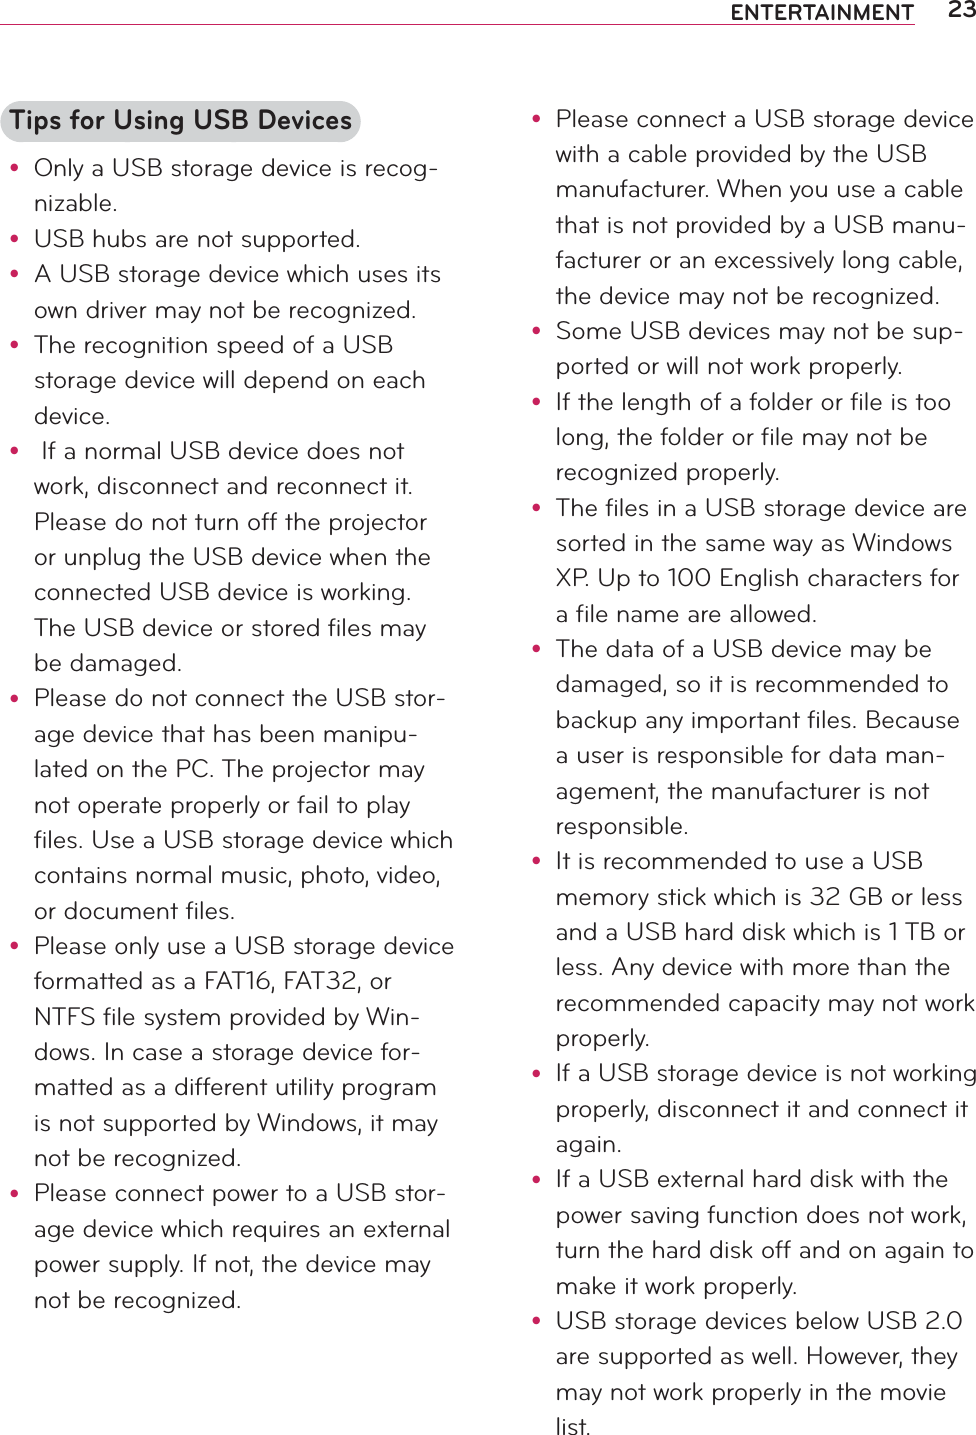 23ENTERTAINMENTTips for Using USB Devicesy Only a USB storage device is recog-nizable.y USB hubs are not supported.y A USB storage device which uses its own driver may not be recognized.y The recognition speed of a USB storage device will depend on each device.y  If a normal USB device does not work, disconnect and reconnect it. Please do not turn off the projector or unplug the USB device when the connected USB device is working. The USB device or stored files may be damaged.y Please do not connect the USB stor-age device that has been manipu-lated on the PC. The projector may not operate properly or fail to play files. Use a USB storage device which contains normal music, photo, video, or document files.y Please only use a USB storage device formatted as a FAT16, FAT32, or NTFS file system provided by Win-dows. In case a storage device for-matted as a different utility program is not supported by Windows, it may not be recognized.y Please connect power to a USB stor-age device which requires an external power supply. If not, the device may not be recognized.y Please connect a USB storage device with a cable provided by the USB manufacturer. When you use a cable that is not provided by a USB manu-facturer or an excessively long cable, the device may not be recognized.y Some USB devices may not be sup-ported or will not work properly.y If the length of a folder or file is too long, the folder or file may not be recognized properly.y The files in a USB storage device are sorted in the same way as Windows XP. Up to 100 English characters for a file name are allowed.y The data of a USB device may be damaged, so it is recommended to backup any important files. Because a user is responsible for data man-agement, the manufacturer is not responsible.y It is recommended to use a USB memory stick which is 32 GB or less and a USB hard disk which is 1 TB or less. Any device with more than the recommended capacity may not work properly.y If a USB storage device is not working properly, disconnect it and connect it again.y If a USB external hard disk with the power saving function does not work, turn the hard disk off and on again to make it work properly.y USB storage devices below USB 2.0 are supported as well. However, they may not work properly in the movie list.